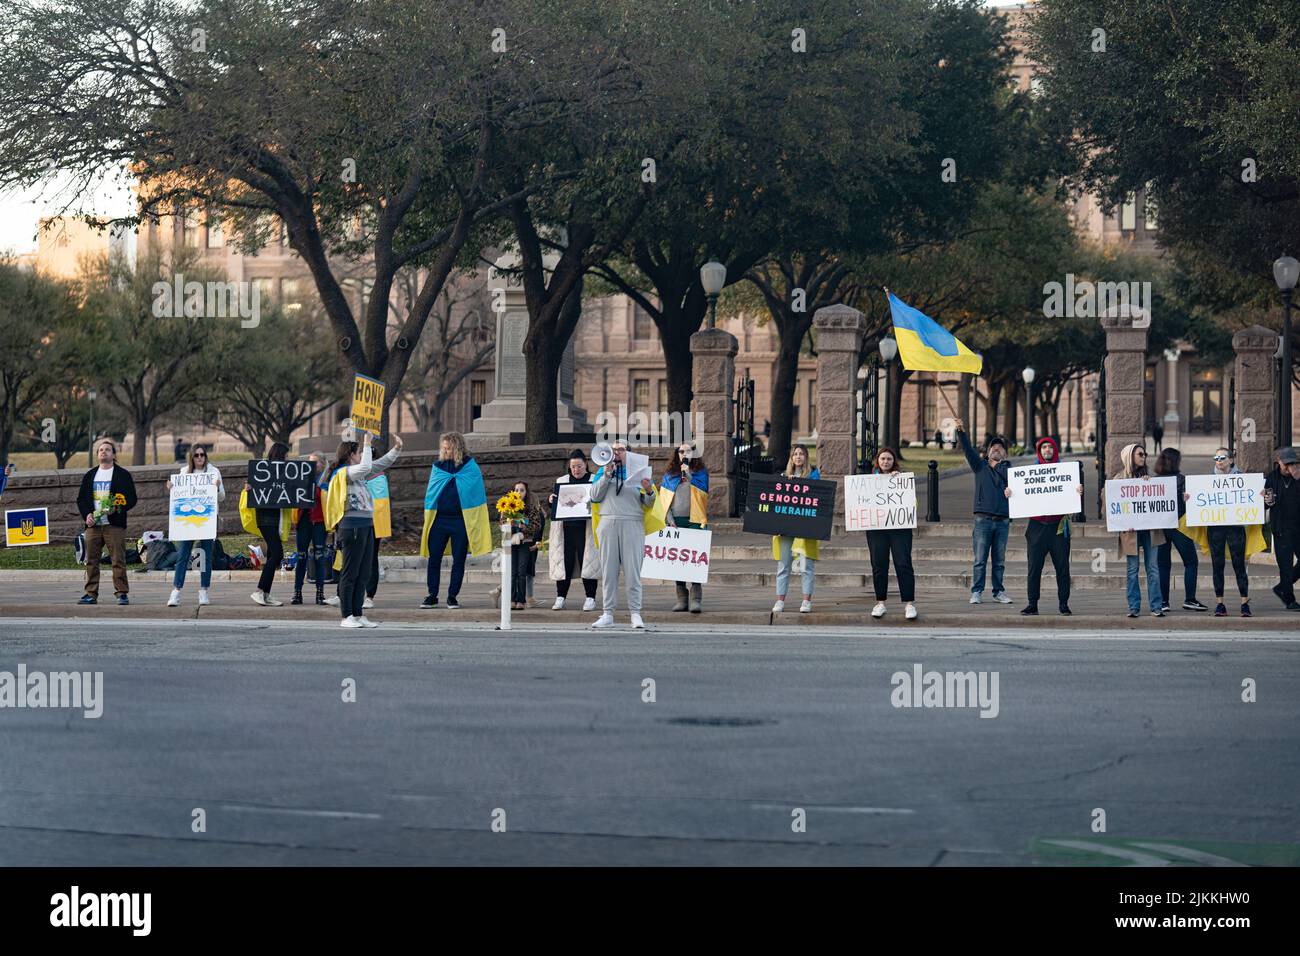 A horizontal shot of people protesting against the war in Ukraine at the Texas Capital Stock Photo